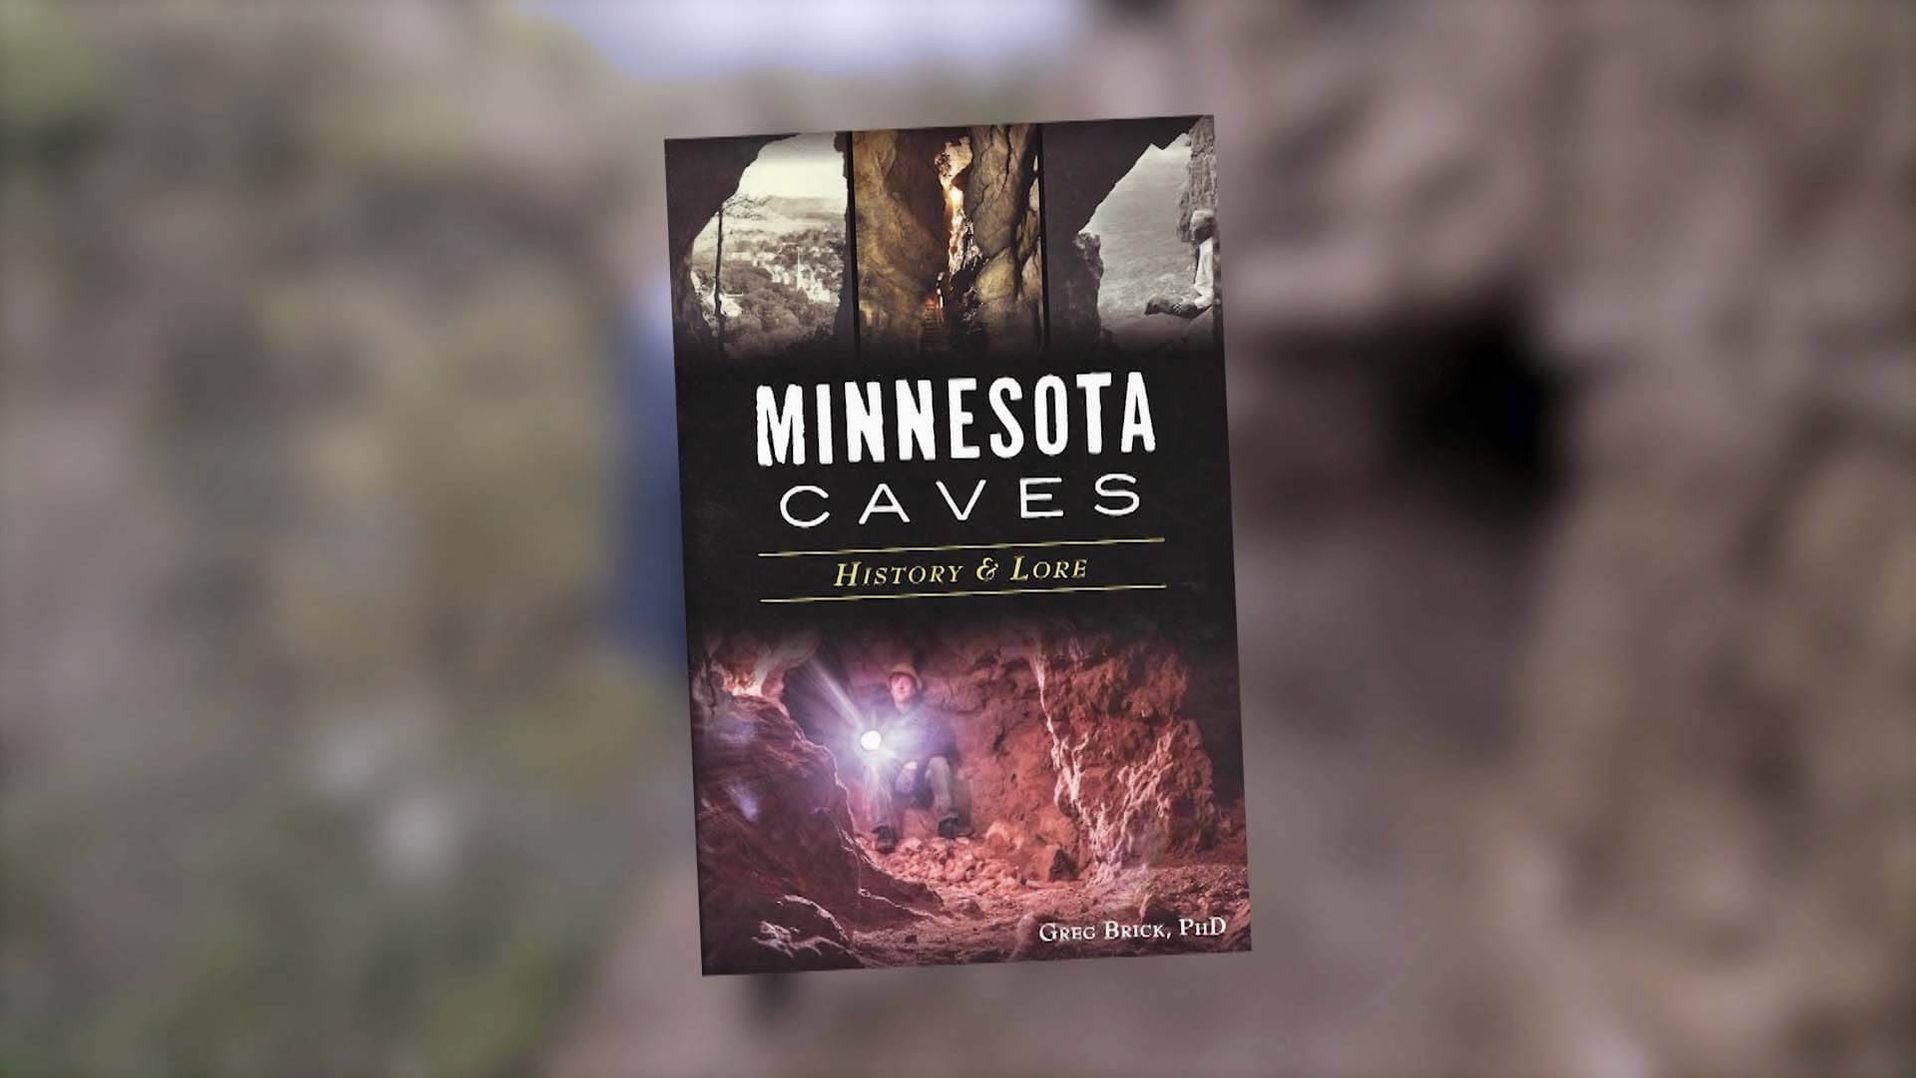 "Minnesota Caves, History and Lore" by Greg Brick